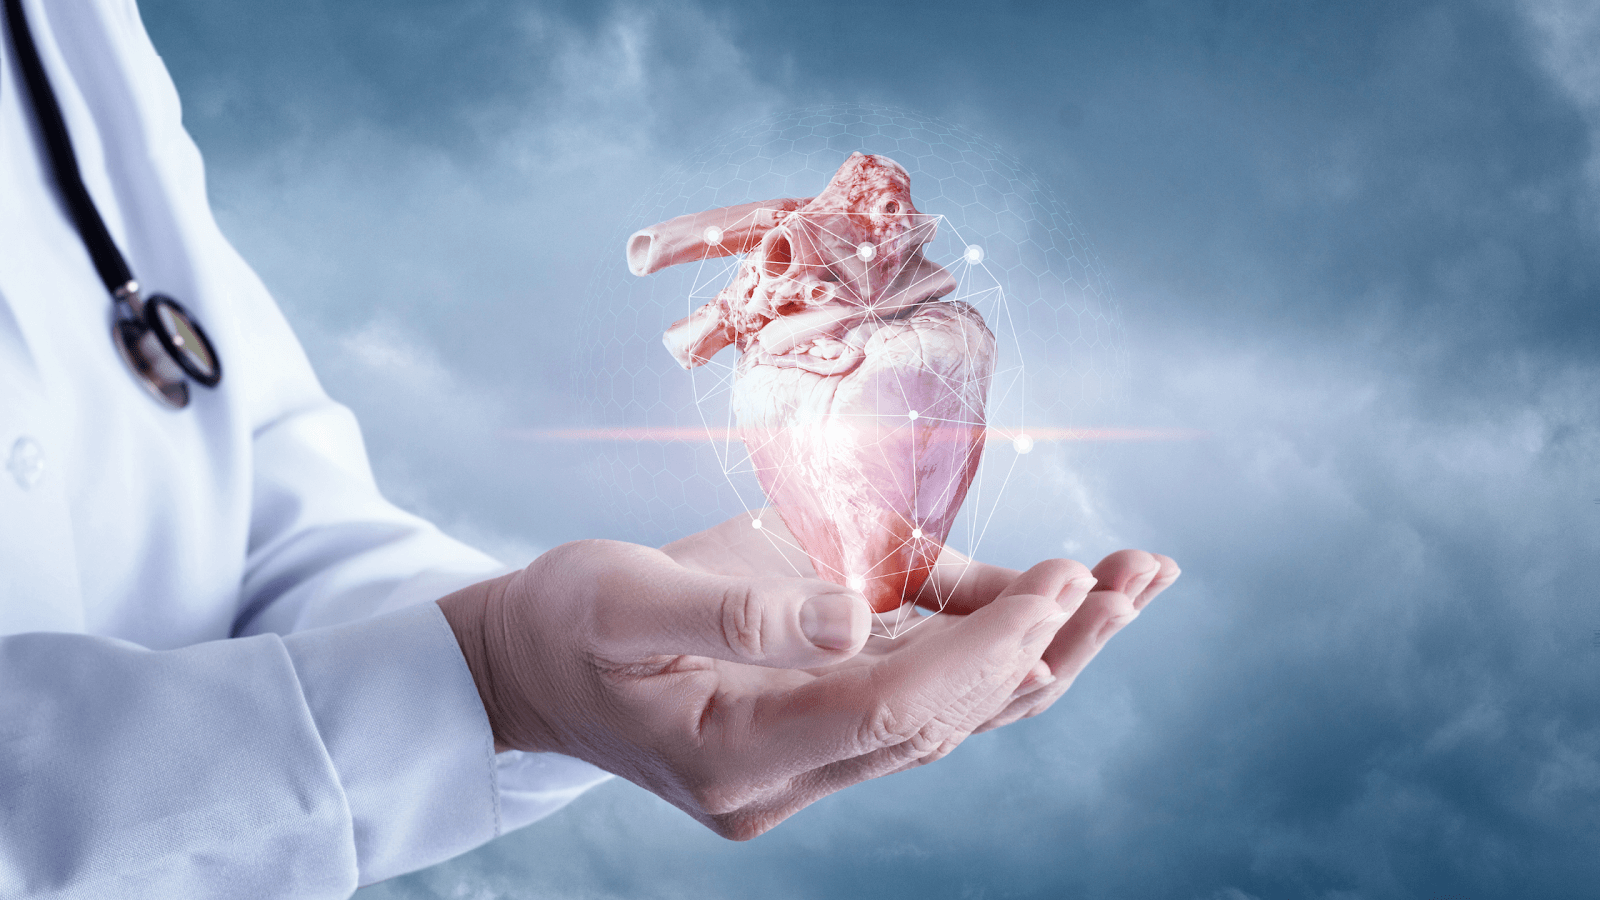 Reduce Your Risk of Heart Disease with Integrative Medicine